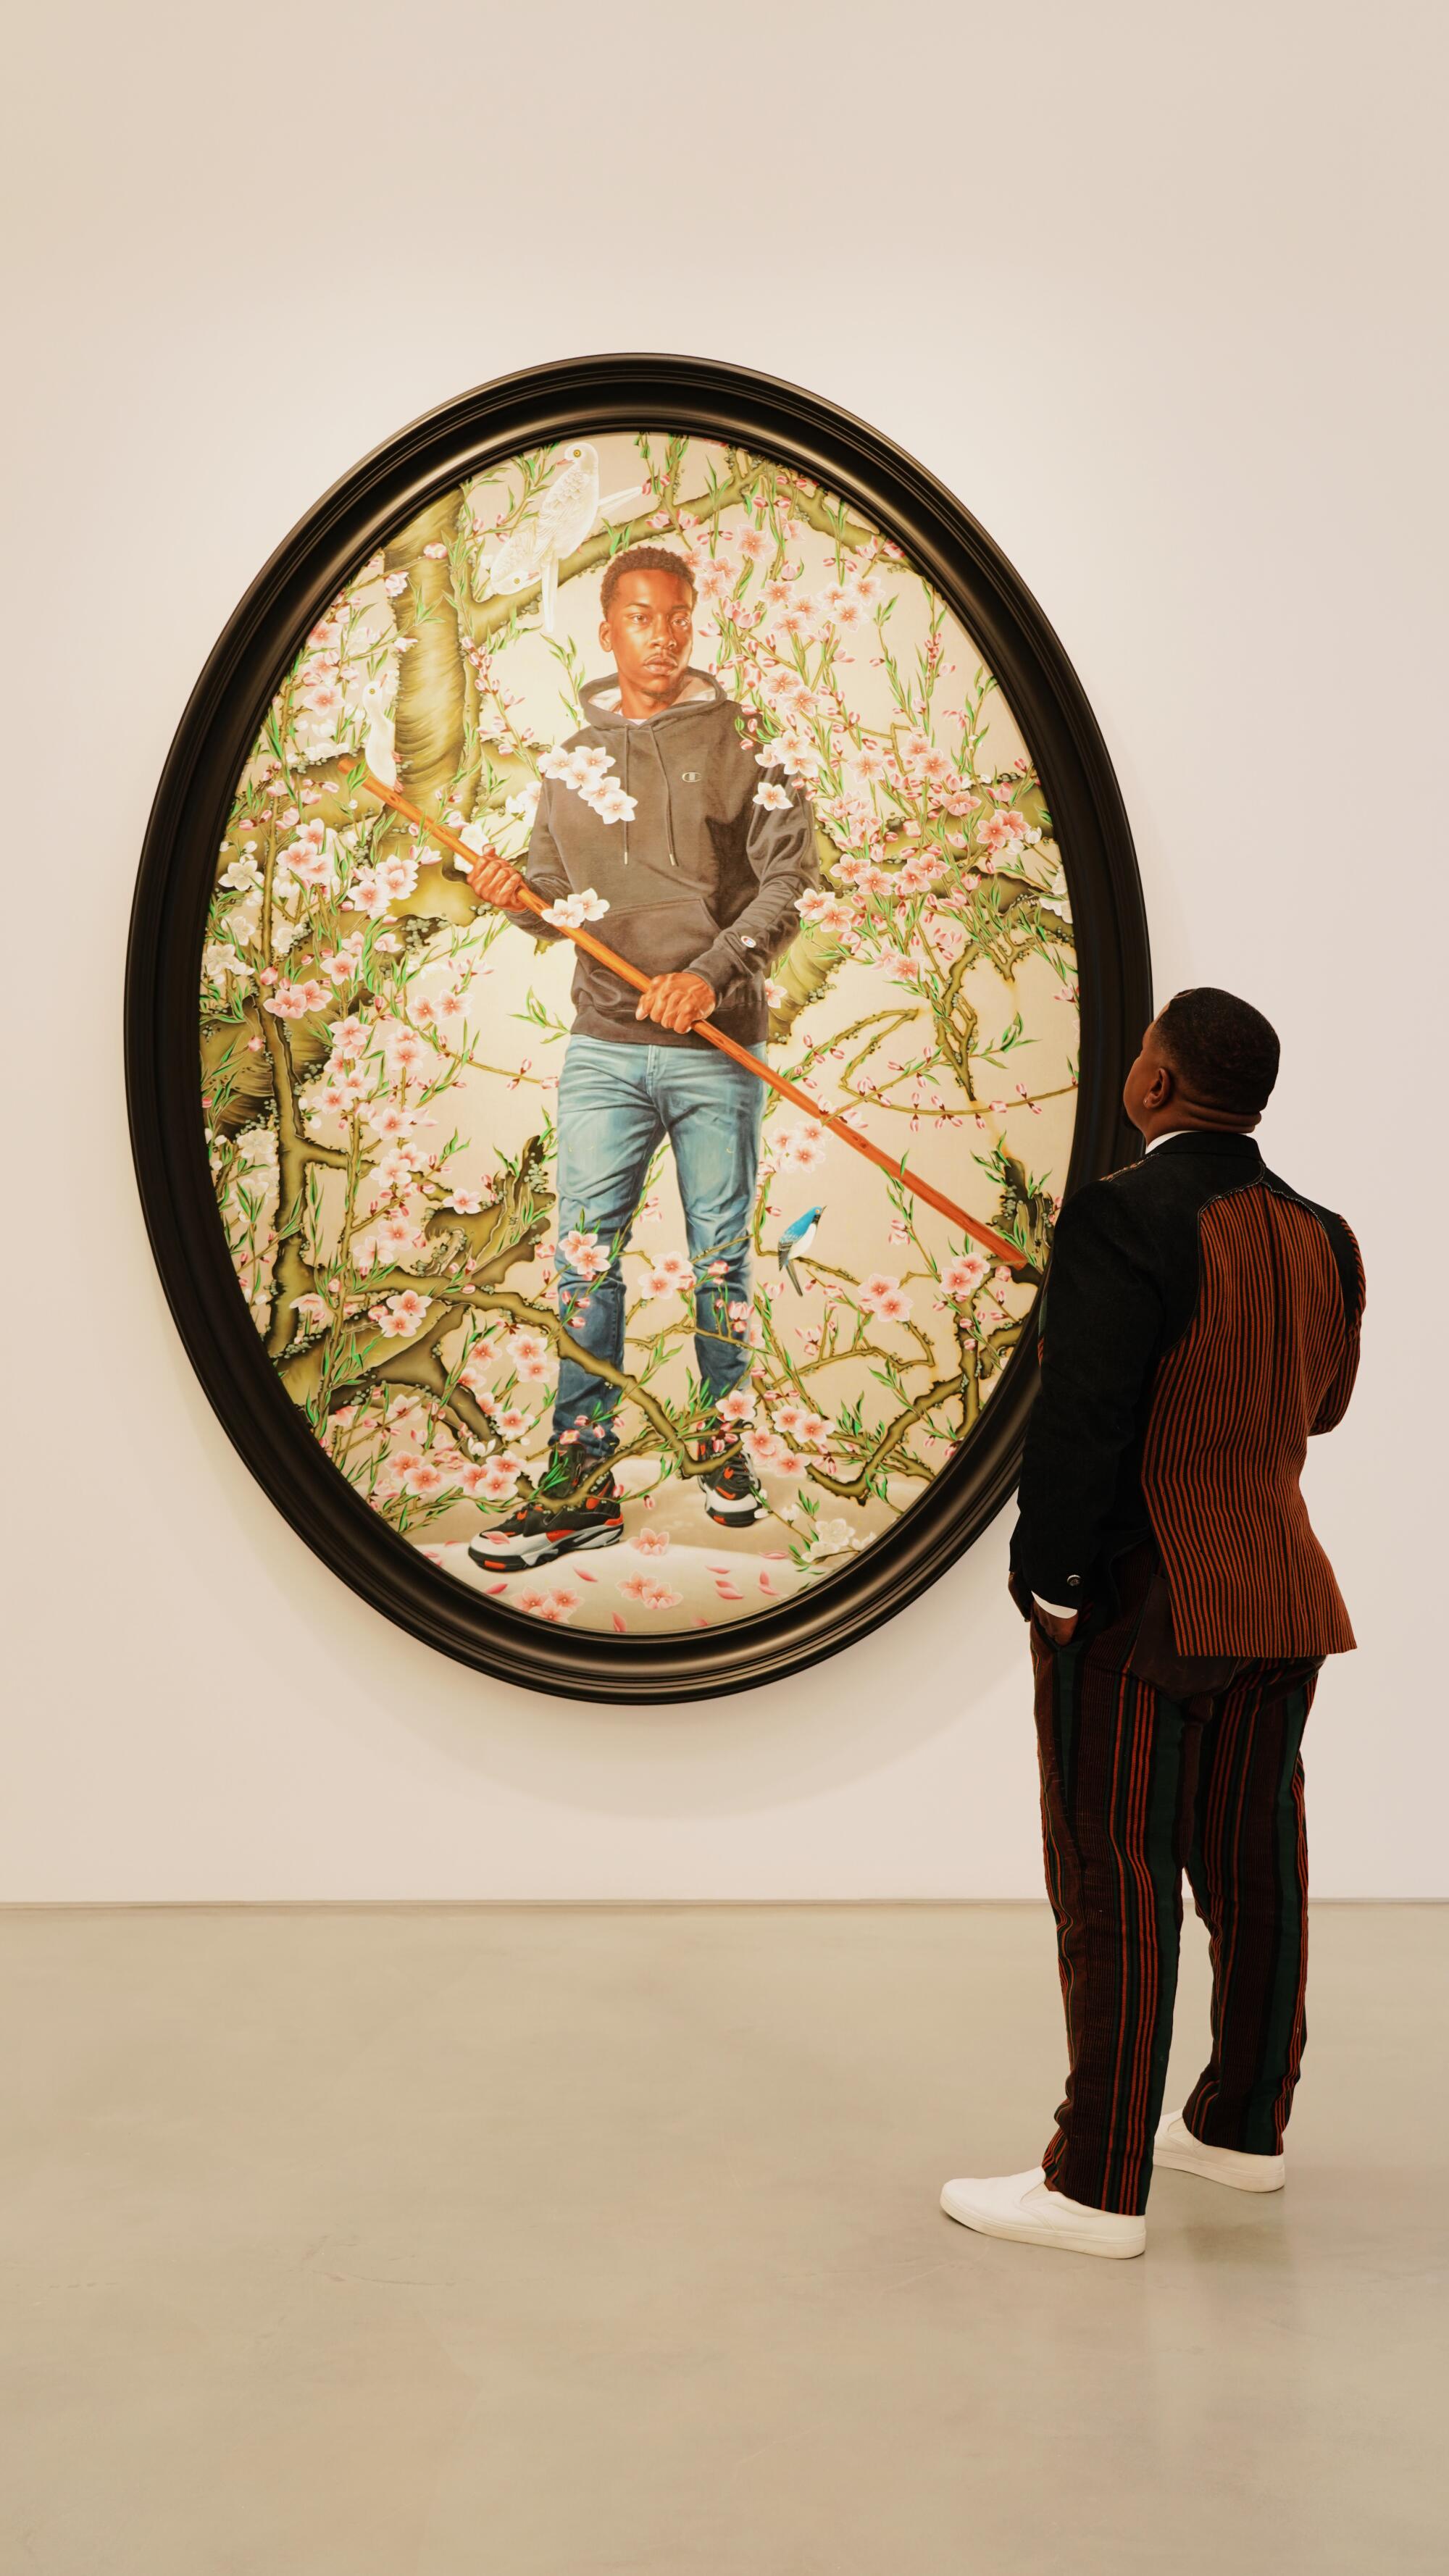 A man in a dark suit looks up at a painting of a young man in nature, in a black oval frame.